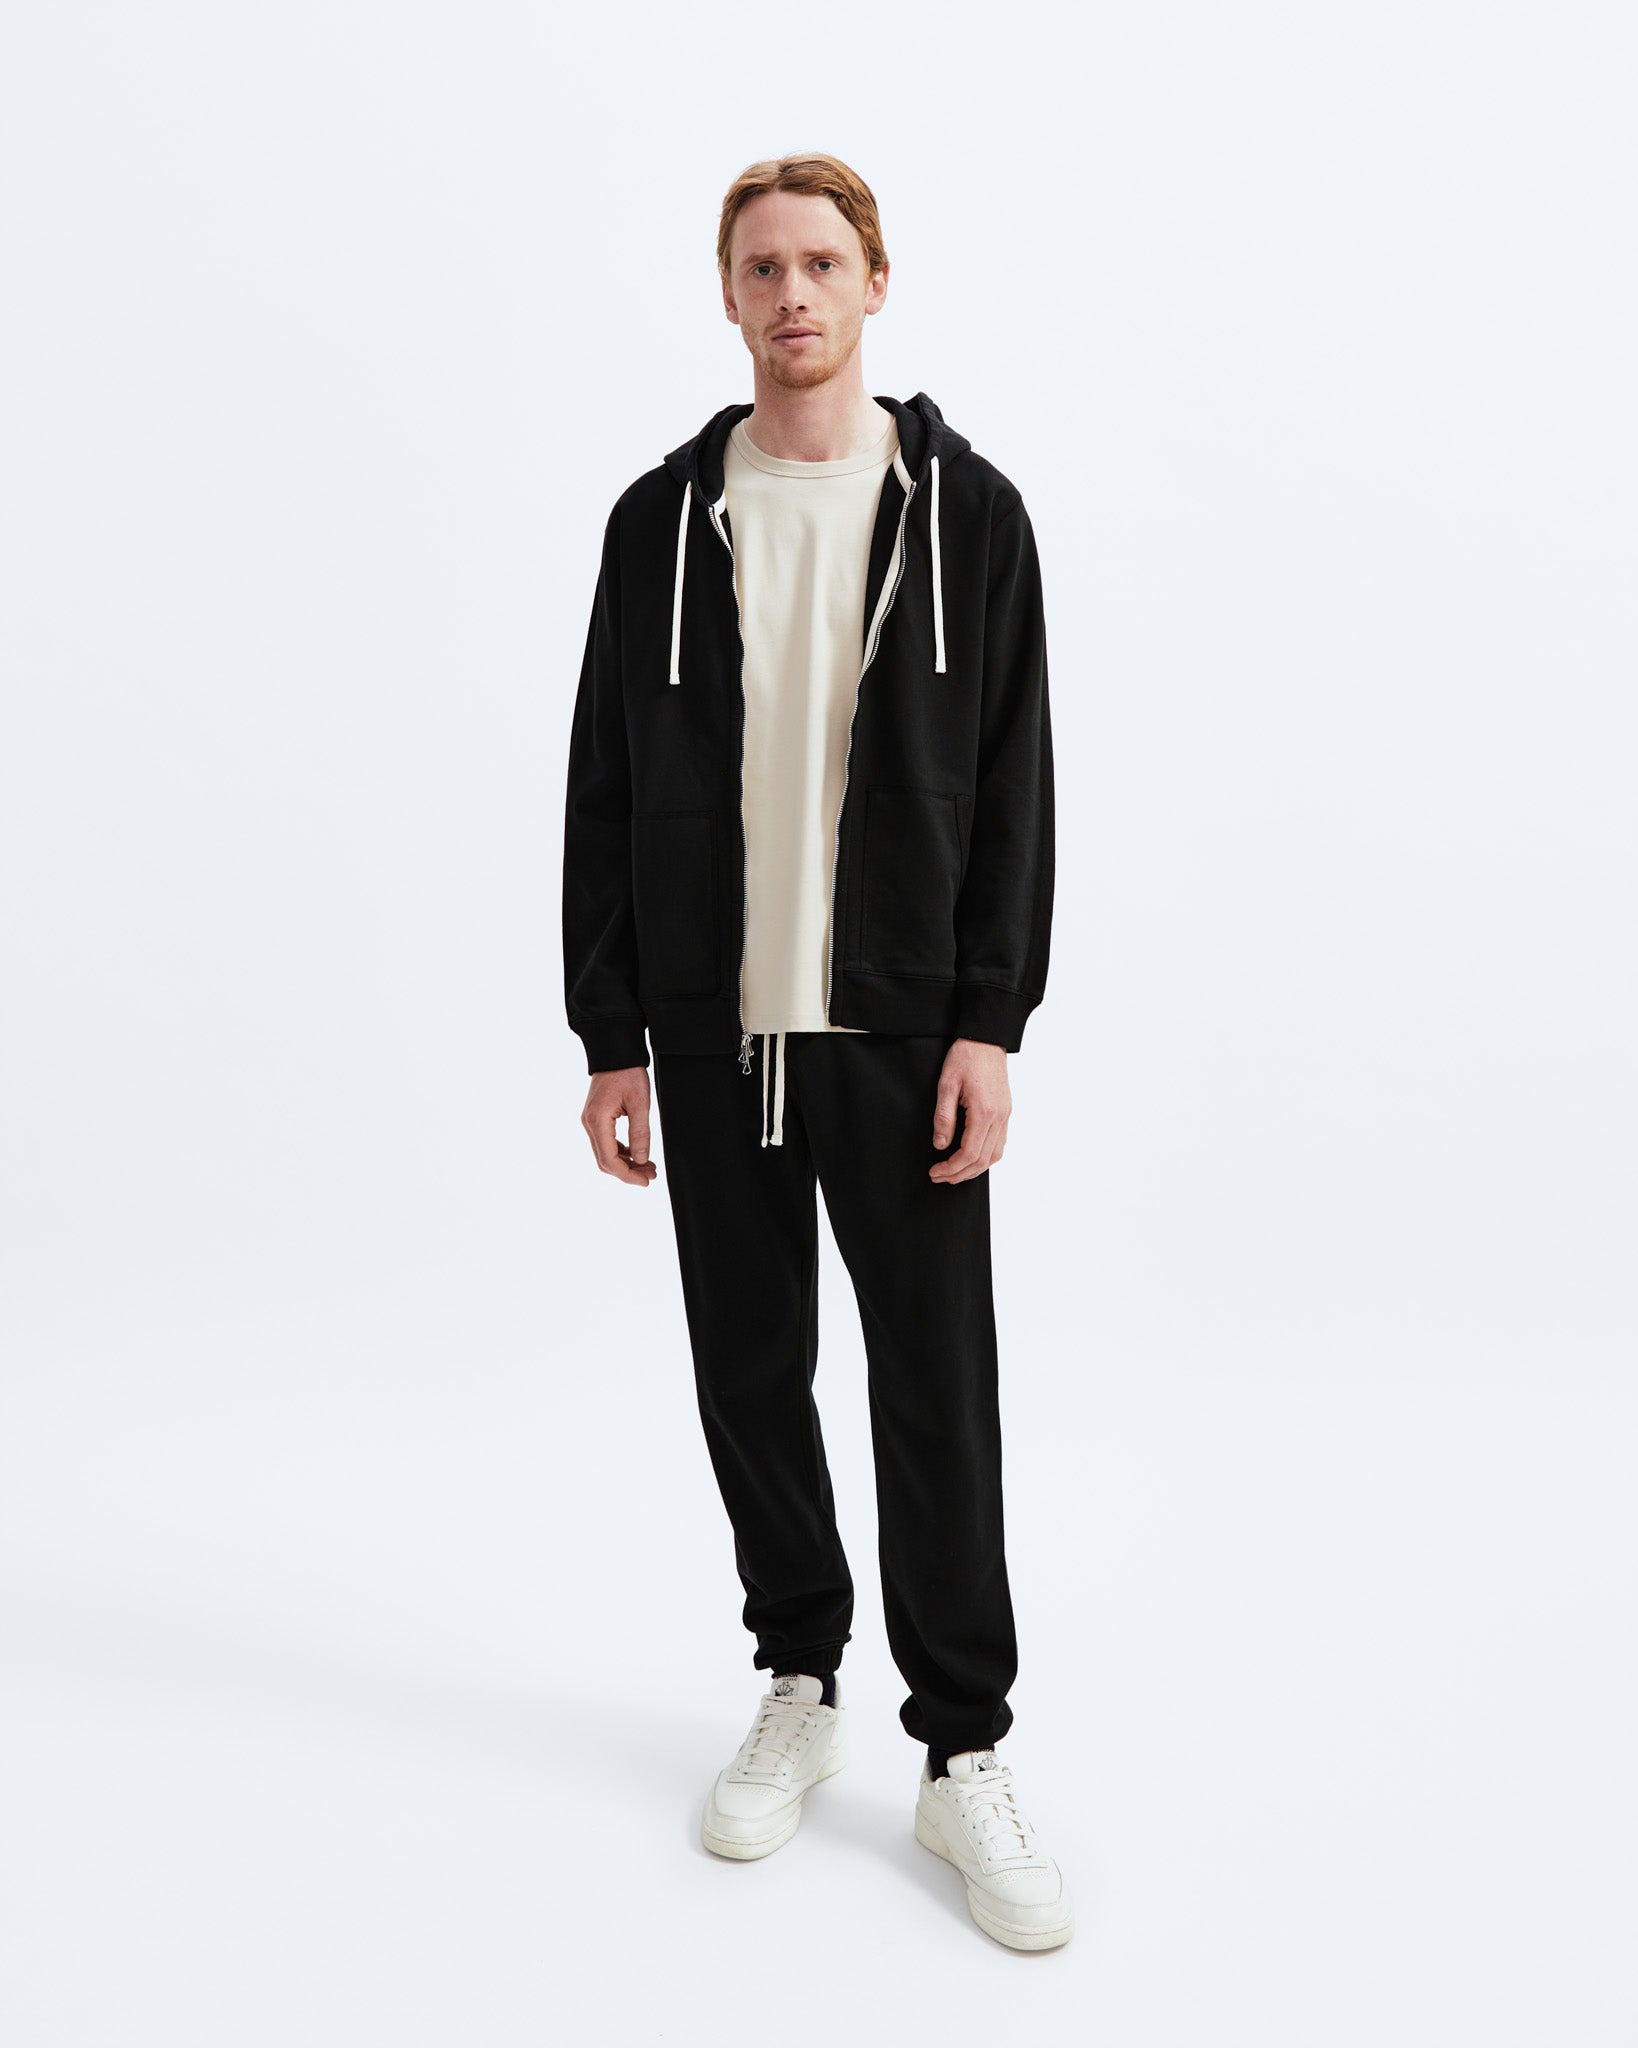 Midweight Terry Classic Full Zip Hoodie